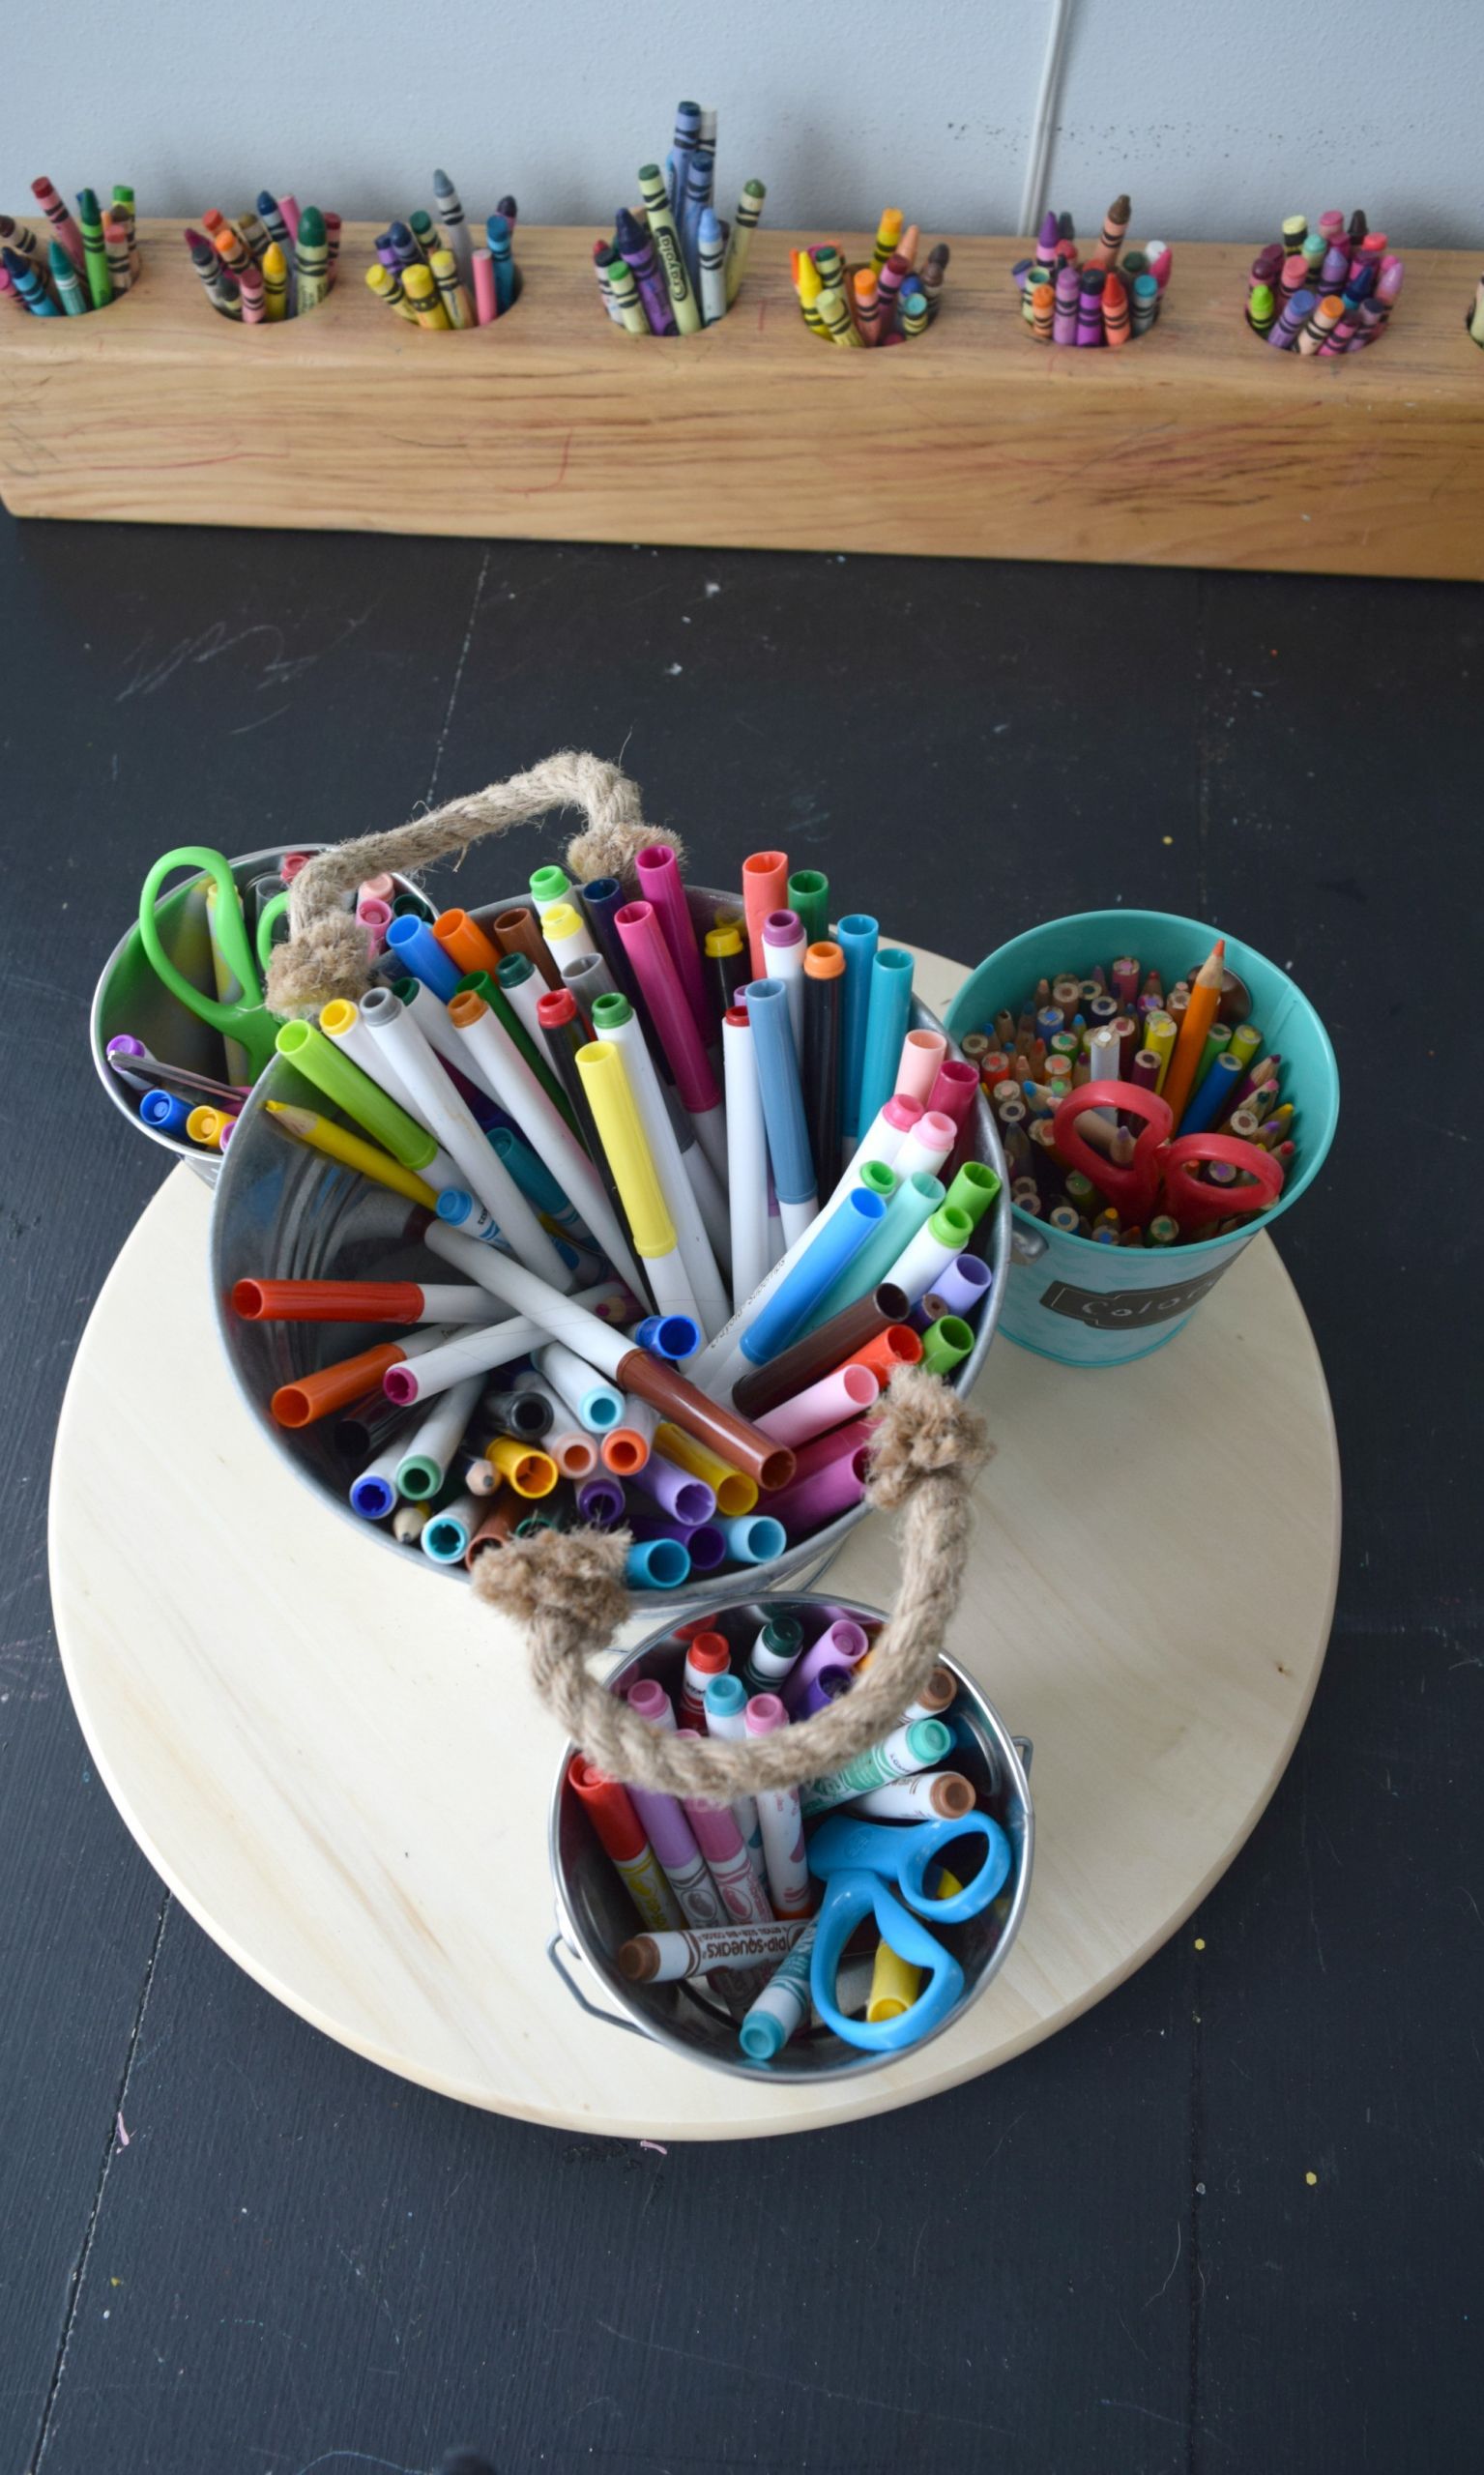 Kids Art Supply Storage
 Kids art table organization ideas • Our House Now a Home